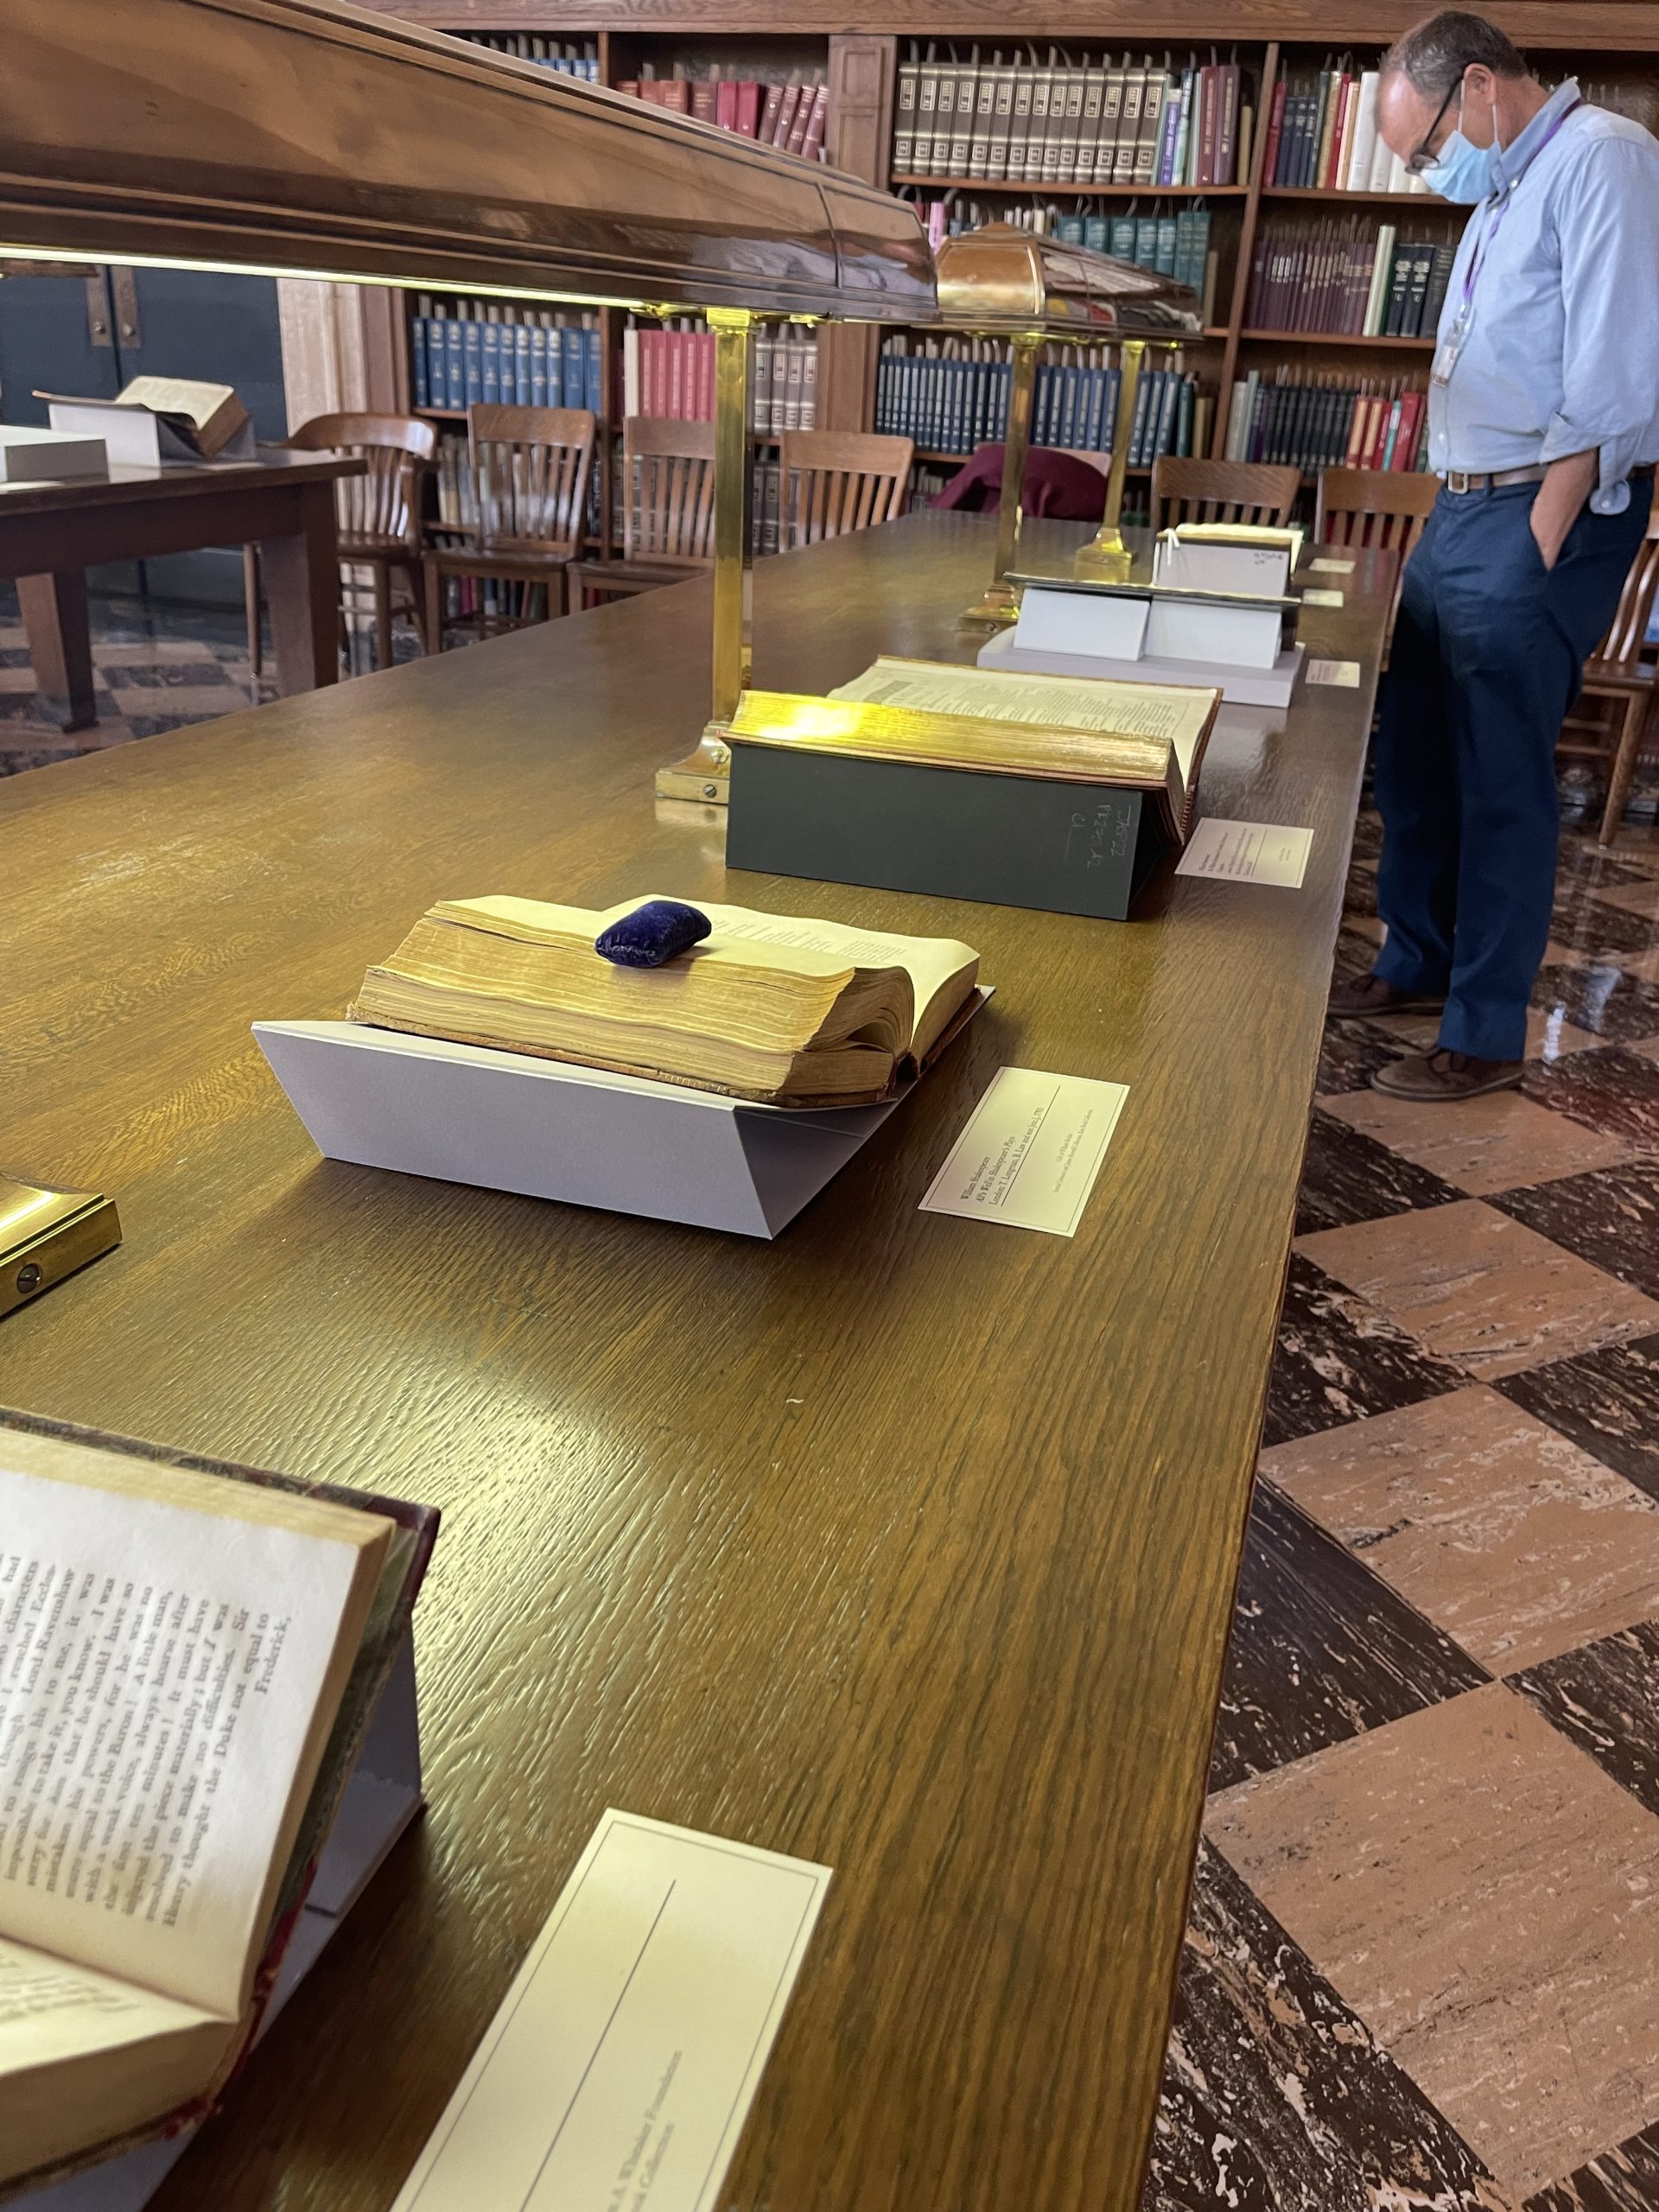 A participant visits the Jane Austen Summer Program's exclusive rare-book exhibit at the Wilson Library.